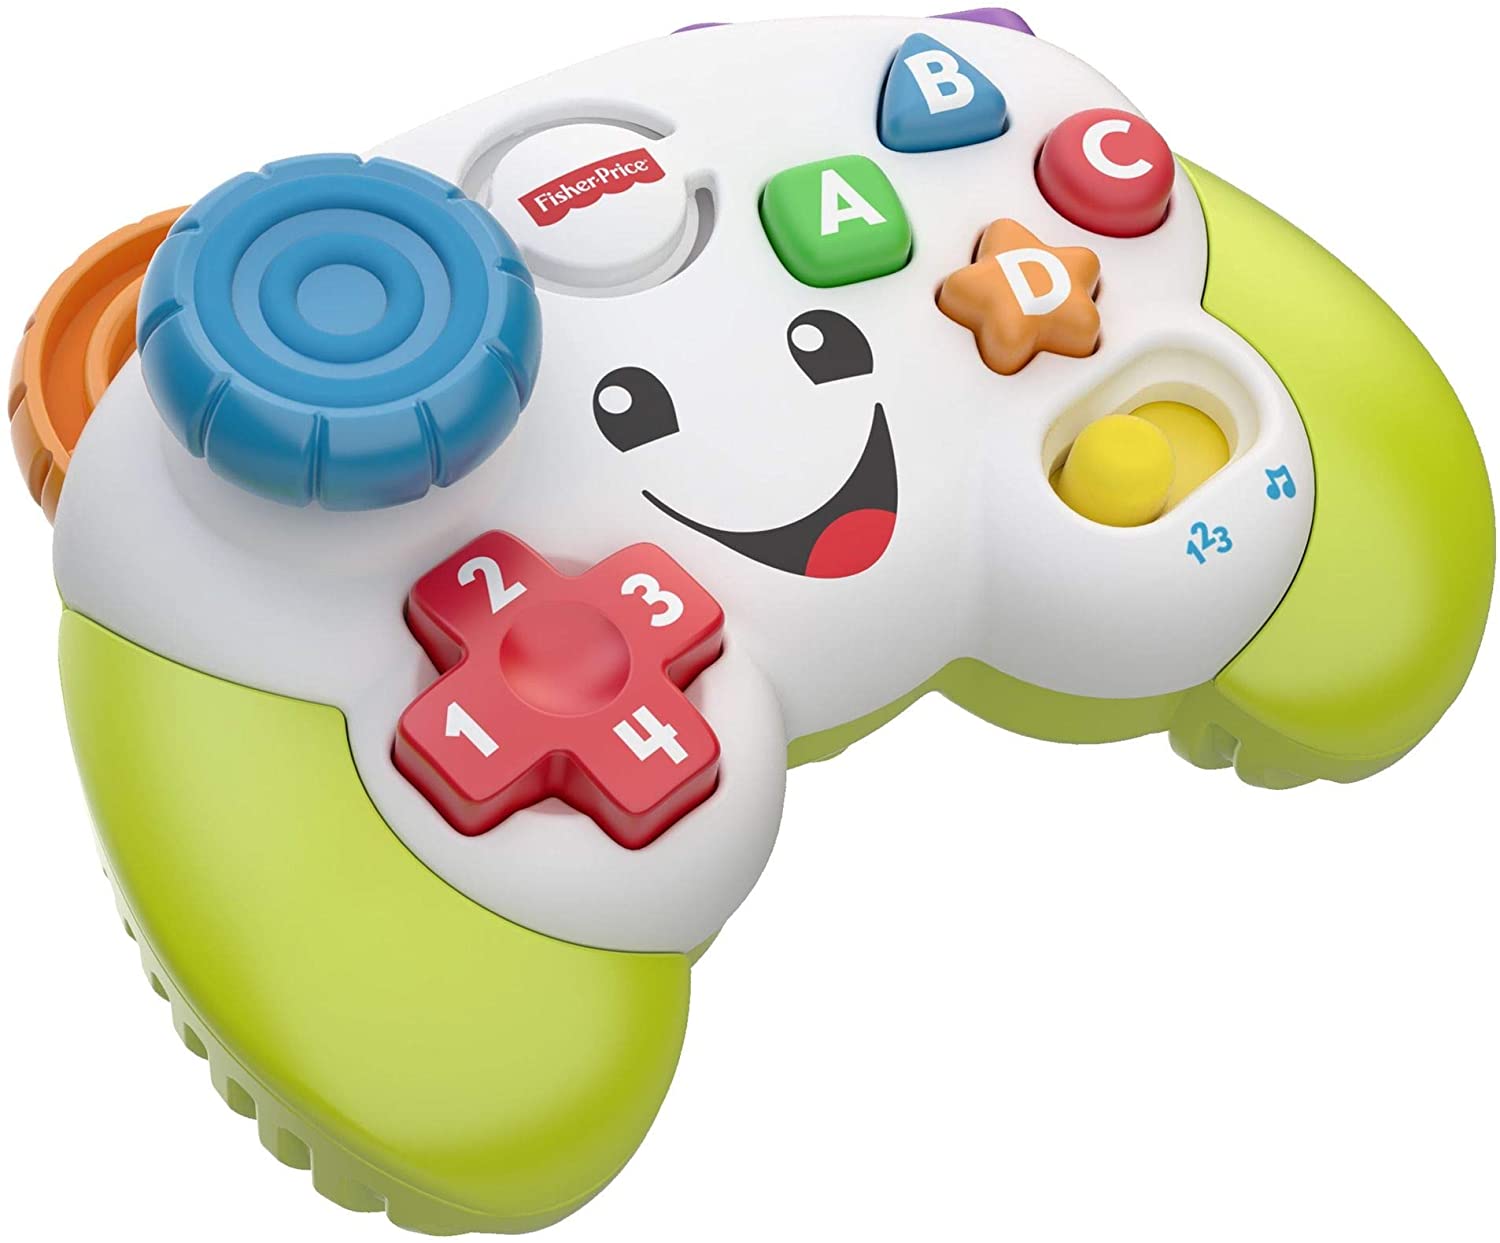 Fisher-Price FWG12 Laugh and Learn Game Controller, White, Red, Blue, Yellow, 10 x 15 x 5 cm